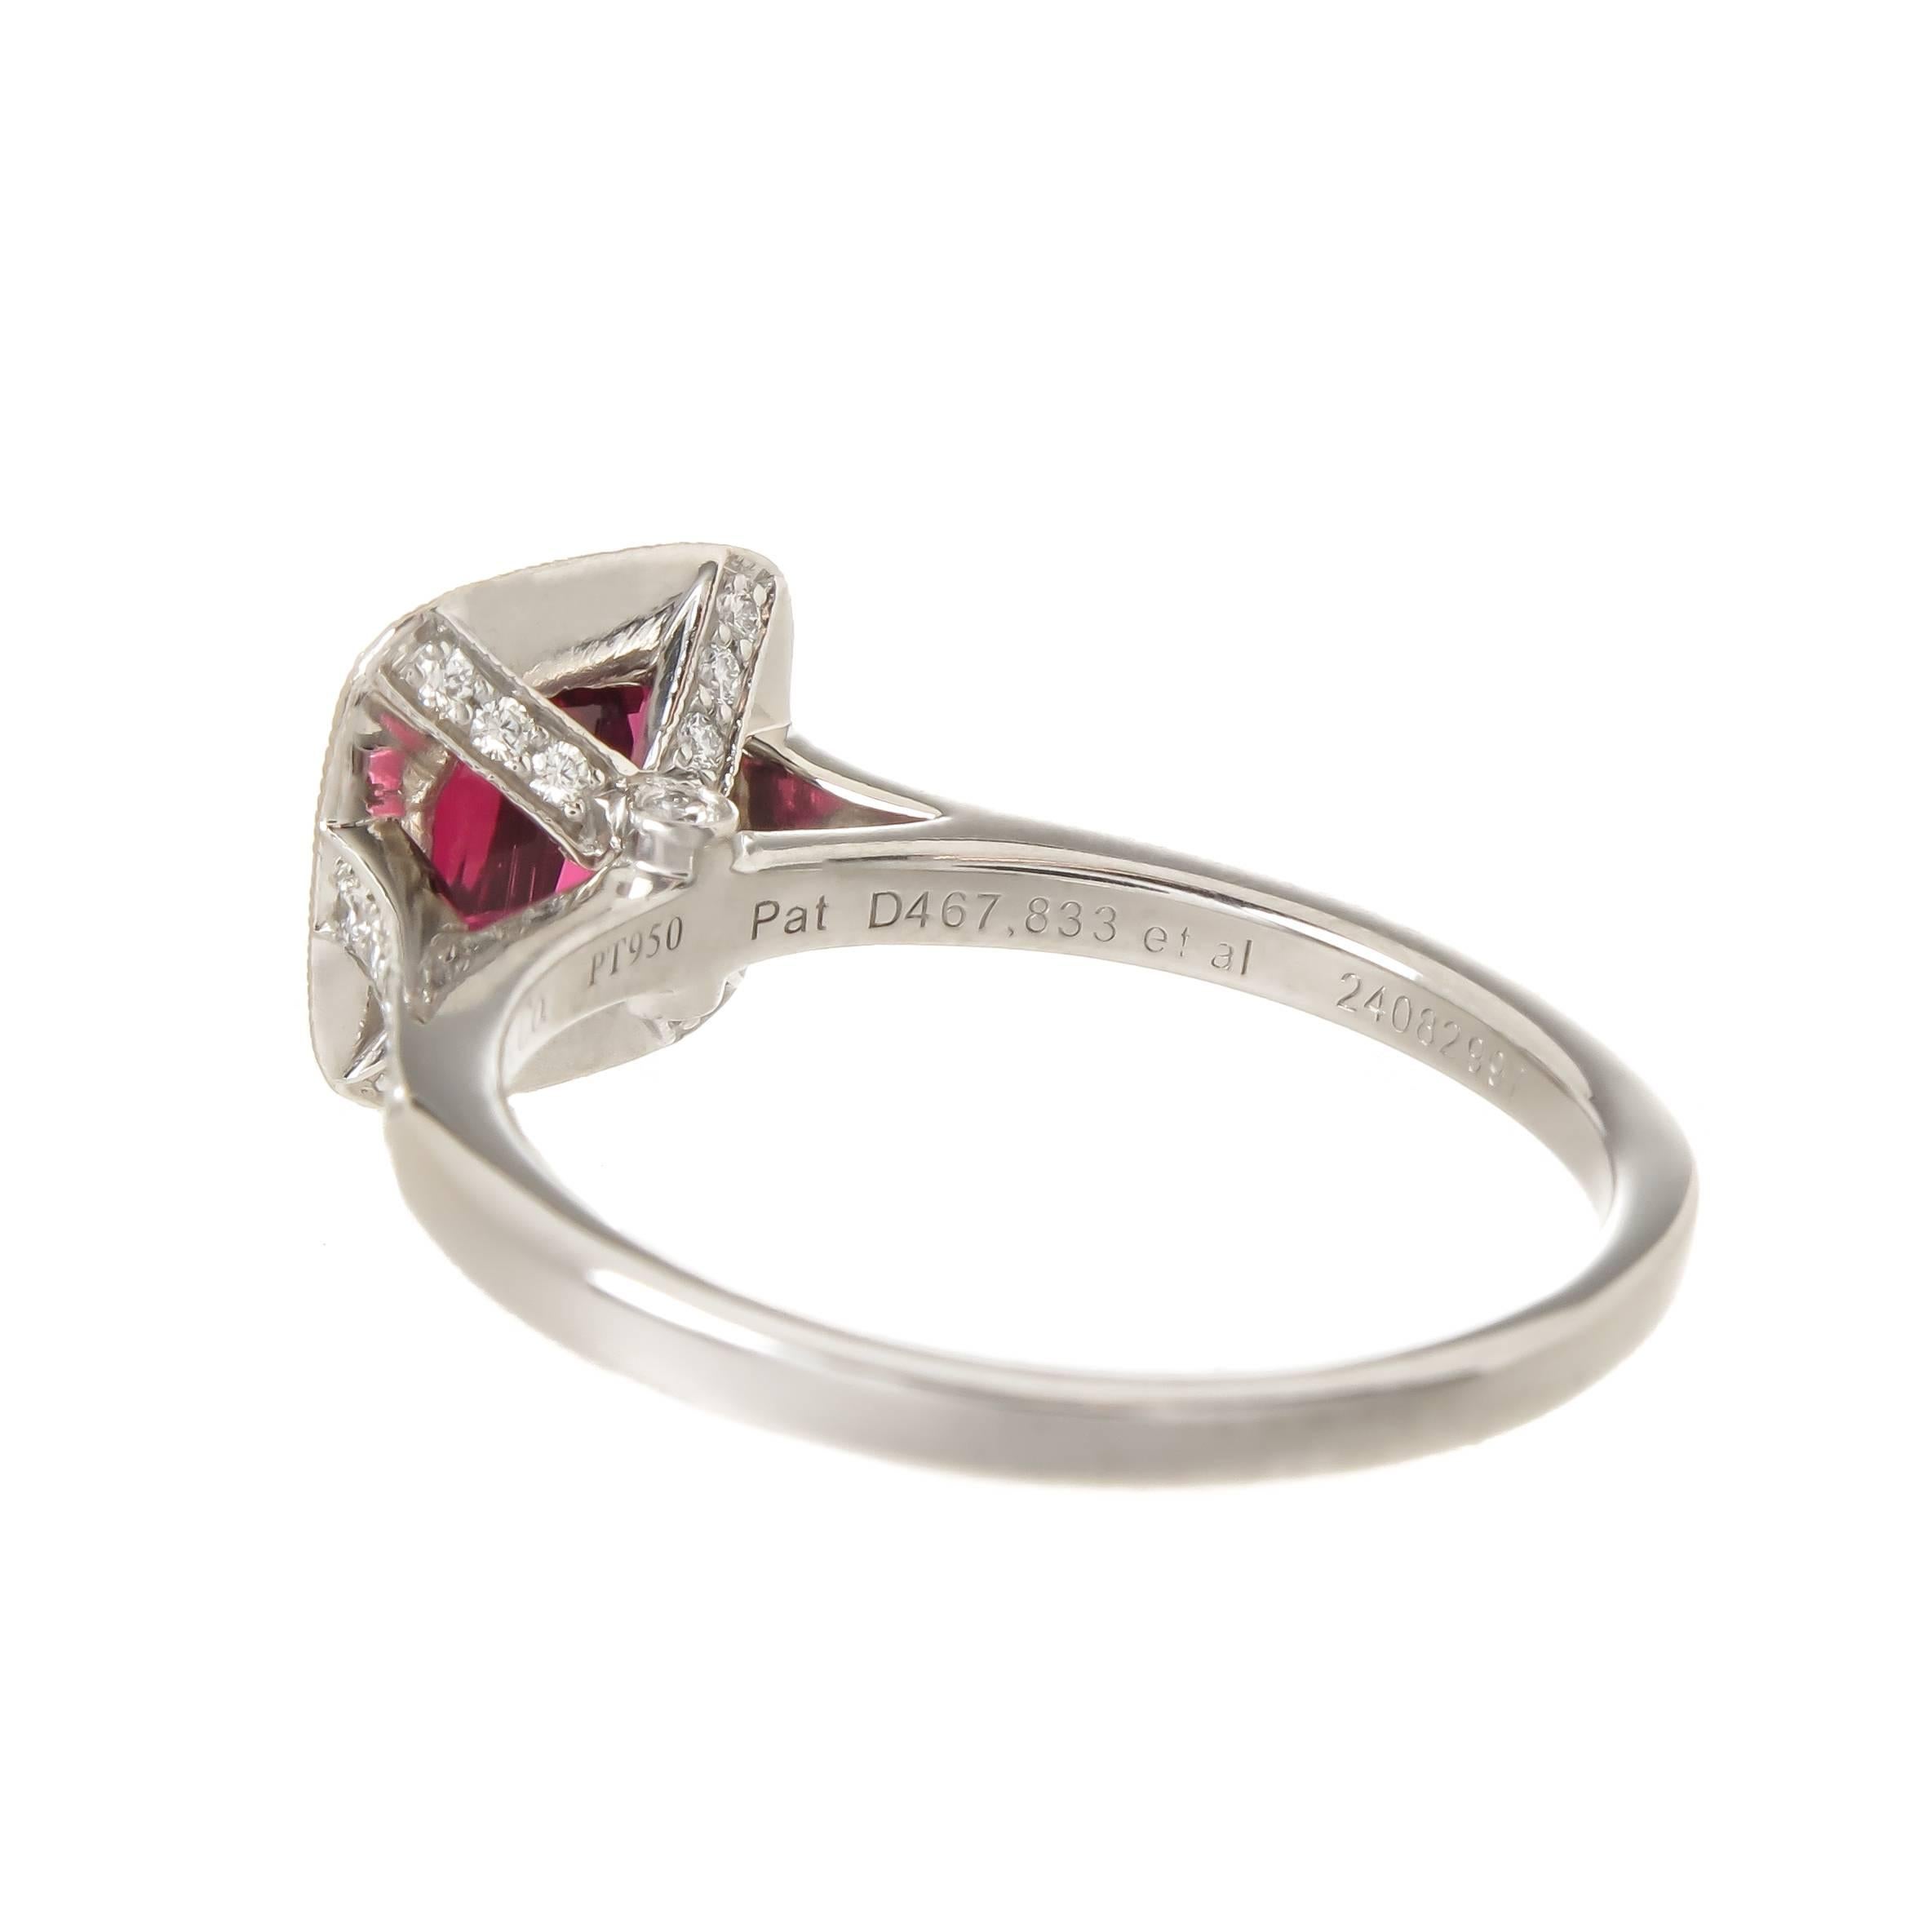 Circa 2015 Tiffany & Company Platinum Ring, centrally set with a very fine, intense color Cushion cut Rubellite of approximately 1.50 Carats and surrounded by 16 Round Brilliant cut Diamonds totaling .48 Carat, further set with 12 Round Brilliant